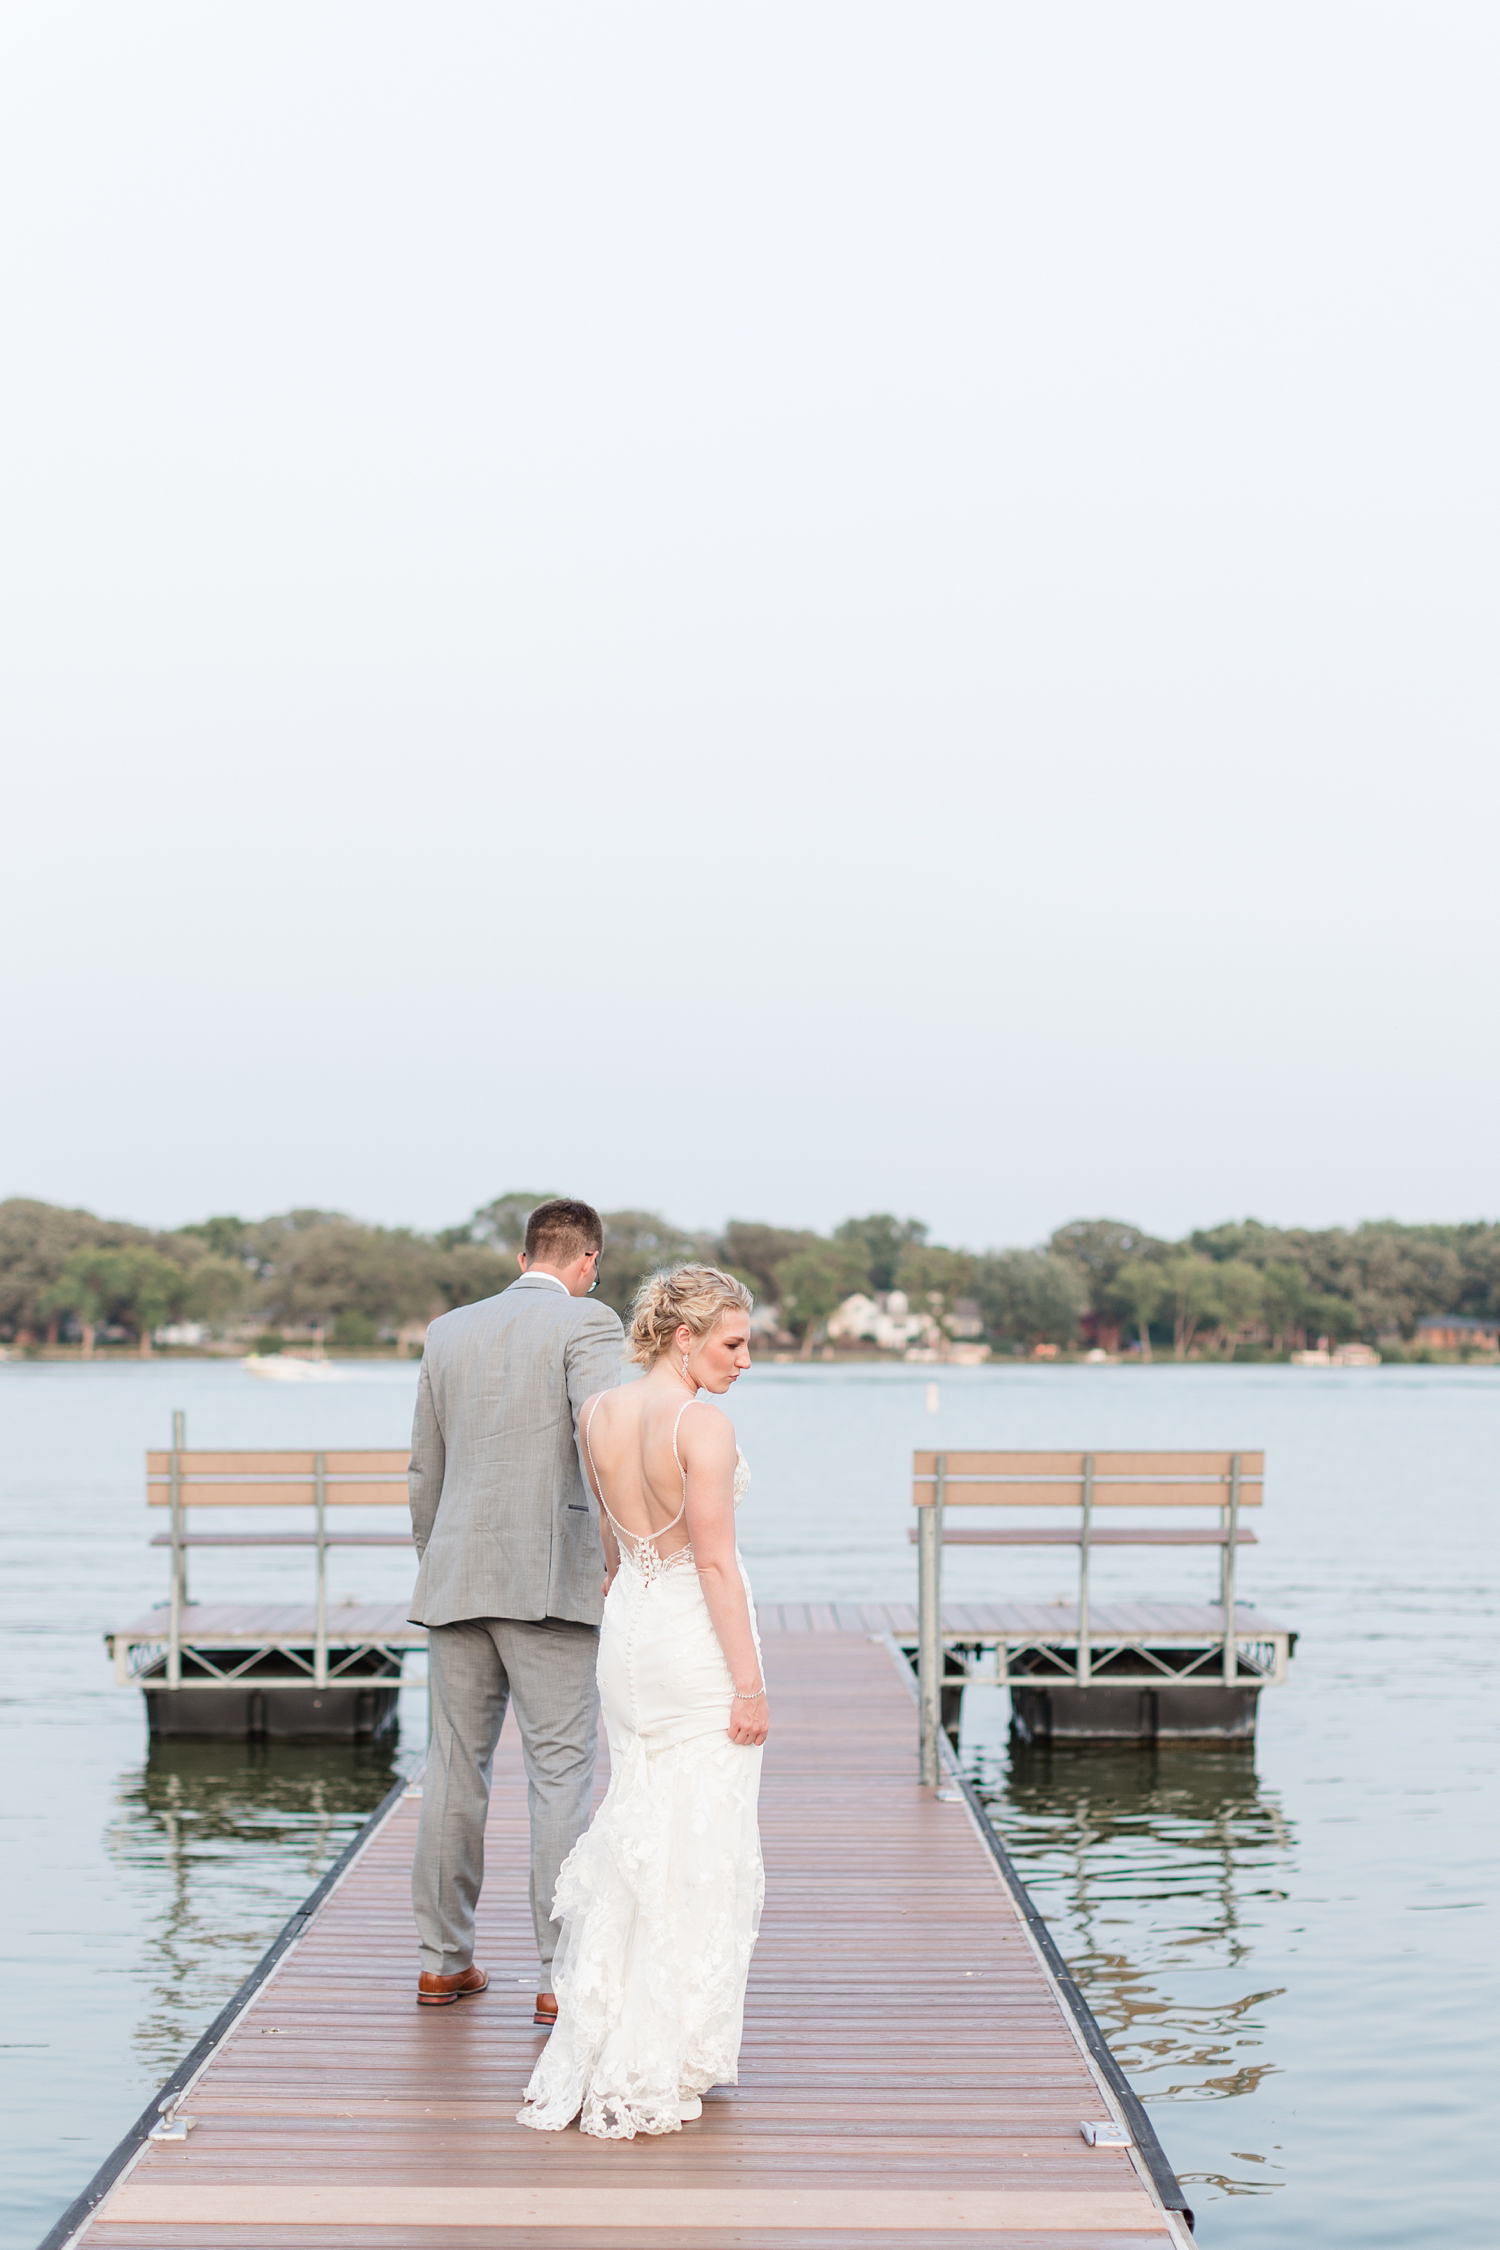 Quinton leads his bride out on the dock at sunset at the Shores at Five Island | CB Studio